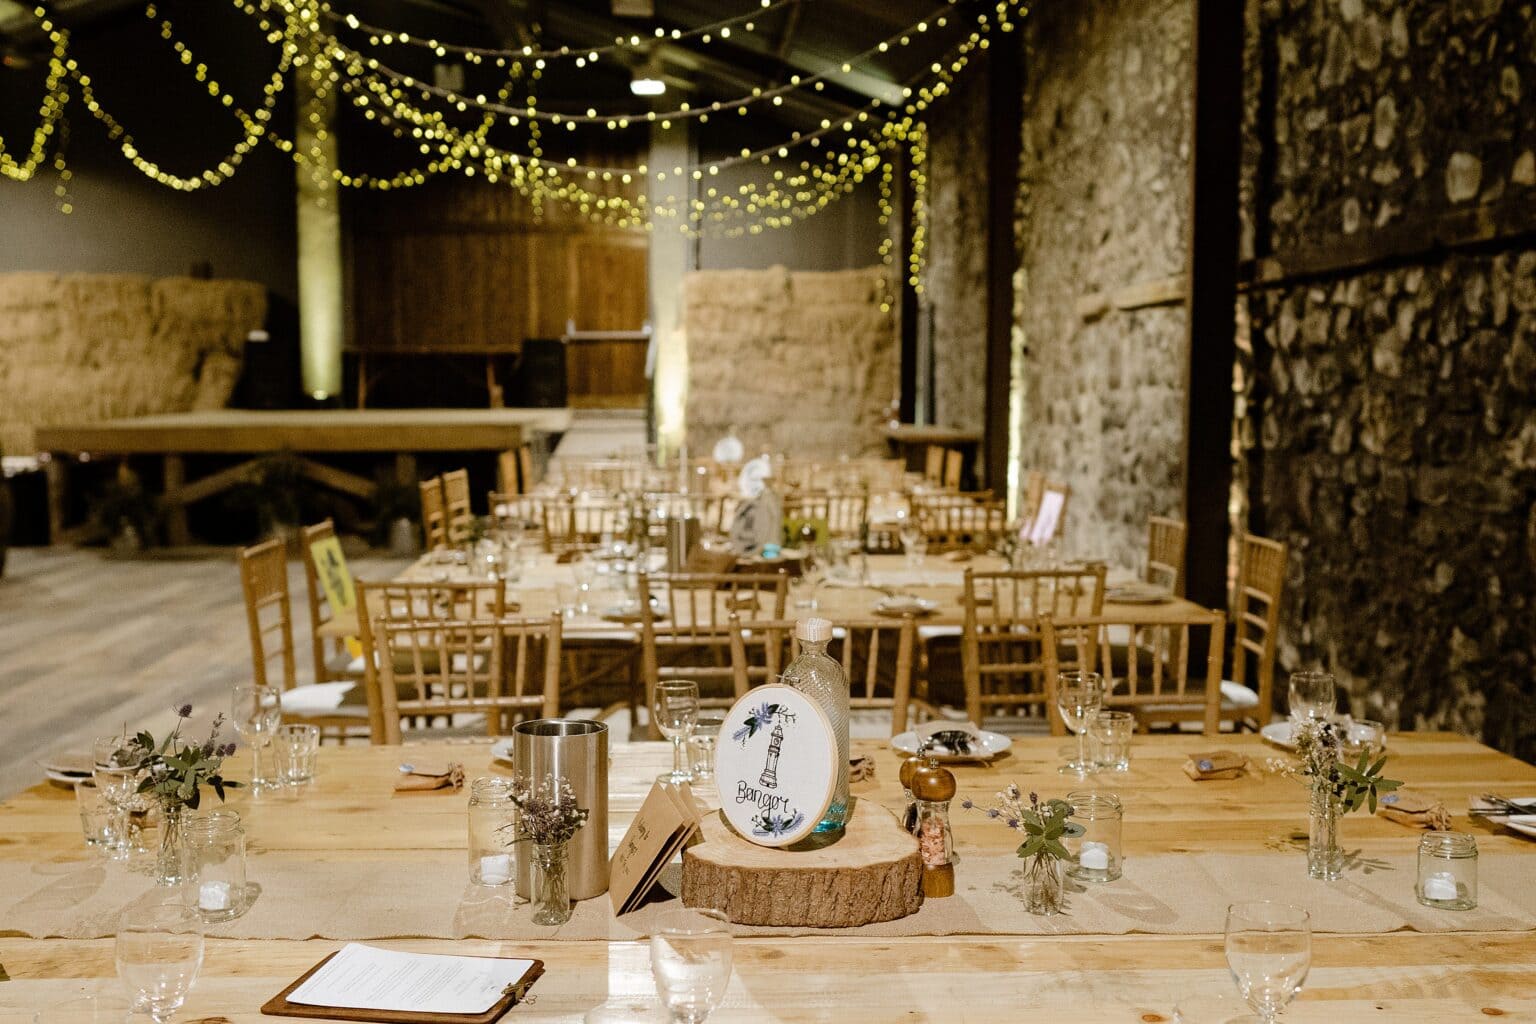 tables set for dinner with festoon lighting hanging above and hay bales in the background at one of the best farm wedding venues scotland